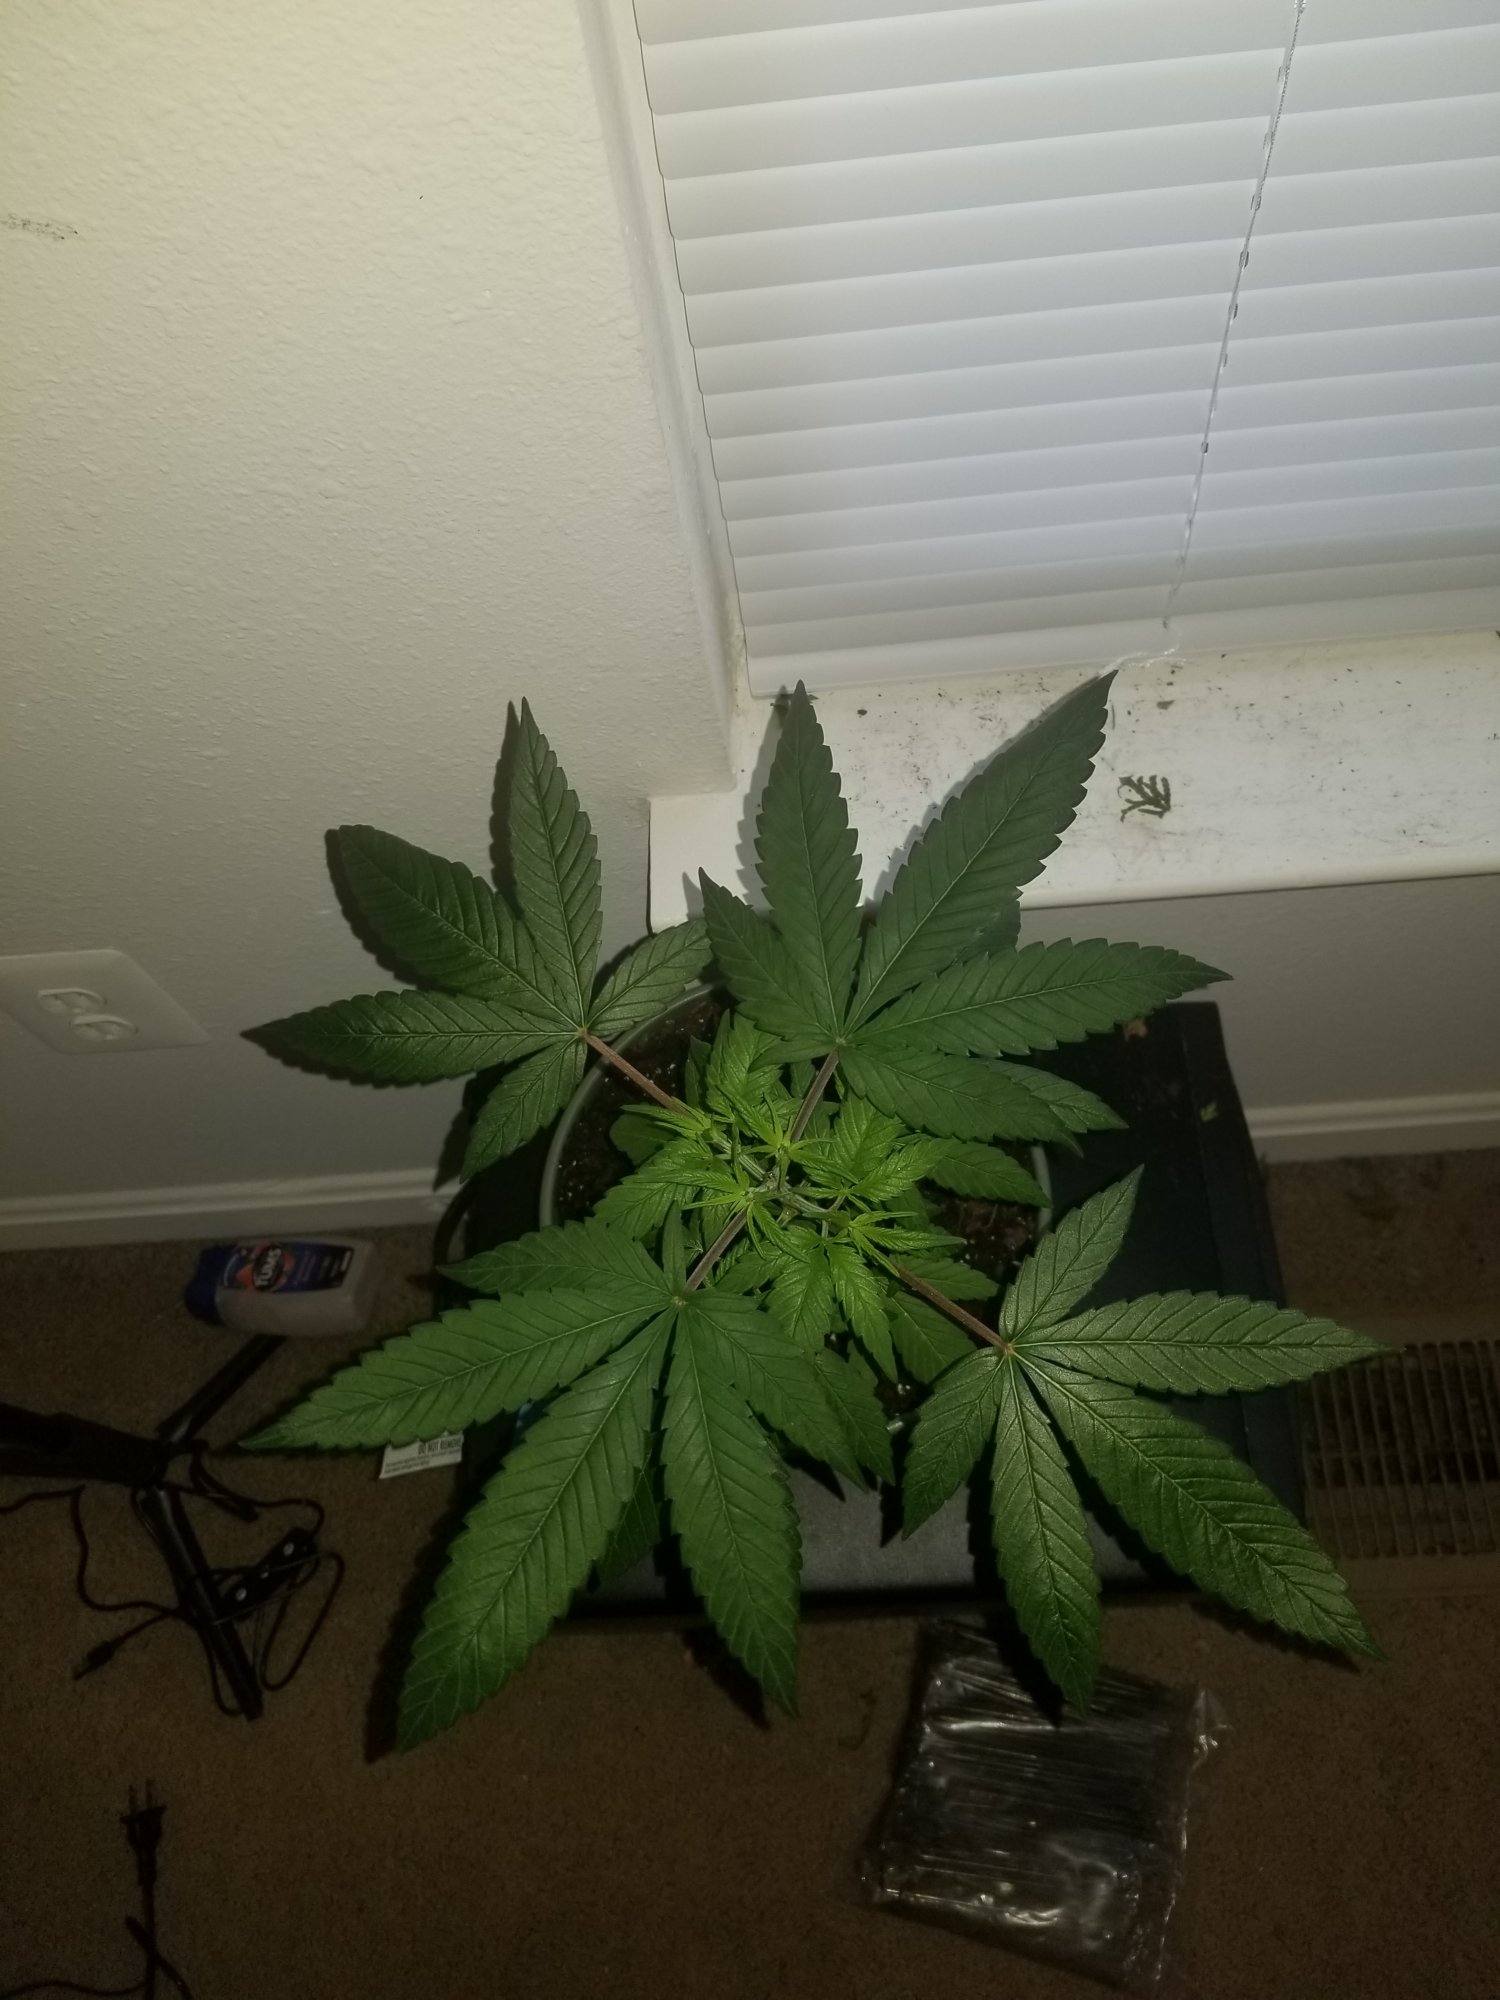 Having trouble transplanting from pot 2